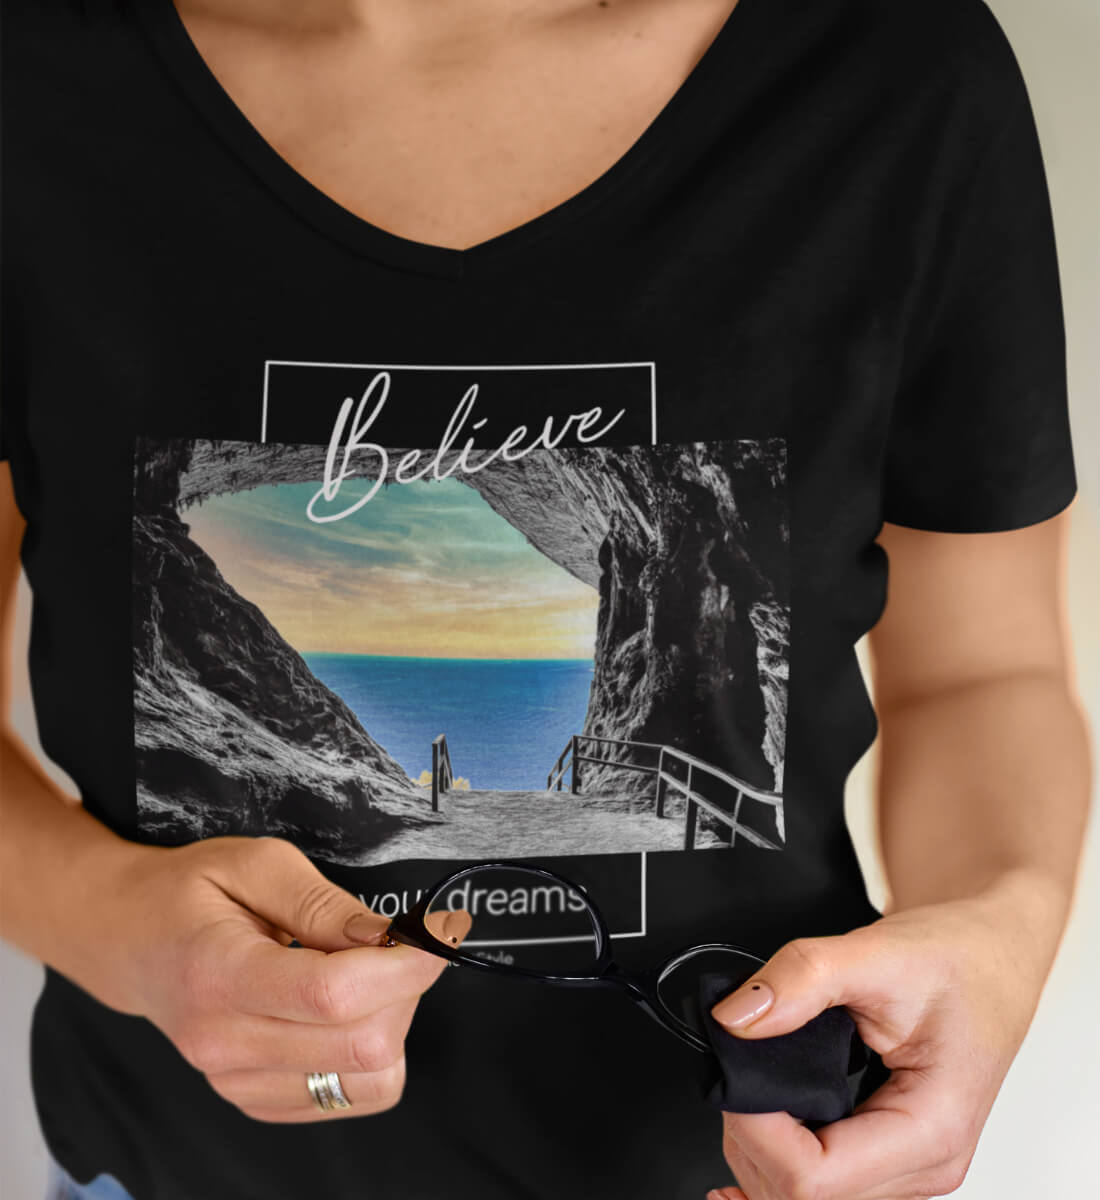 "Believe in your dreams" T-Shirt